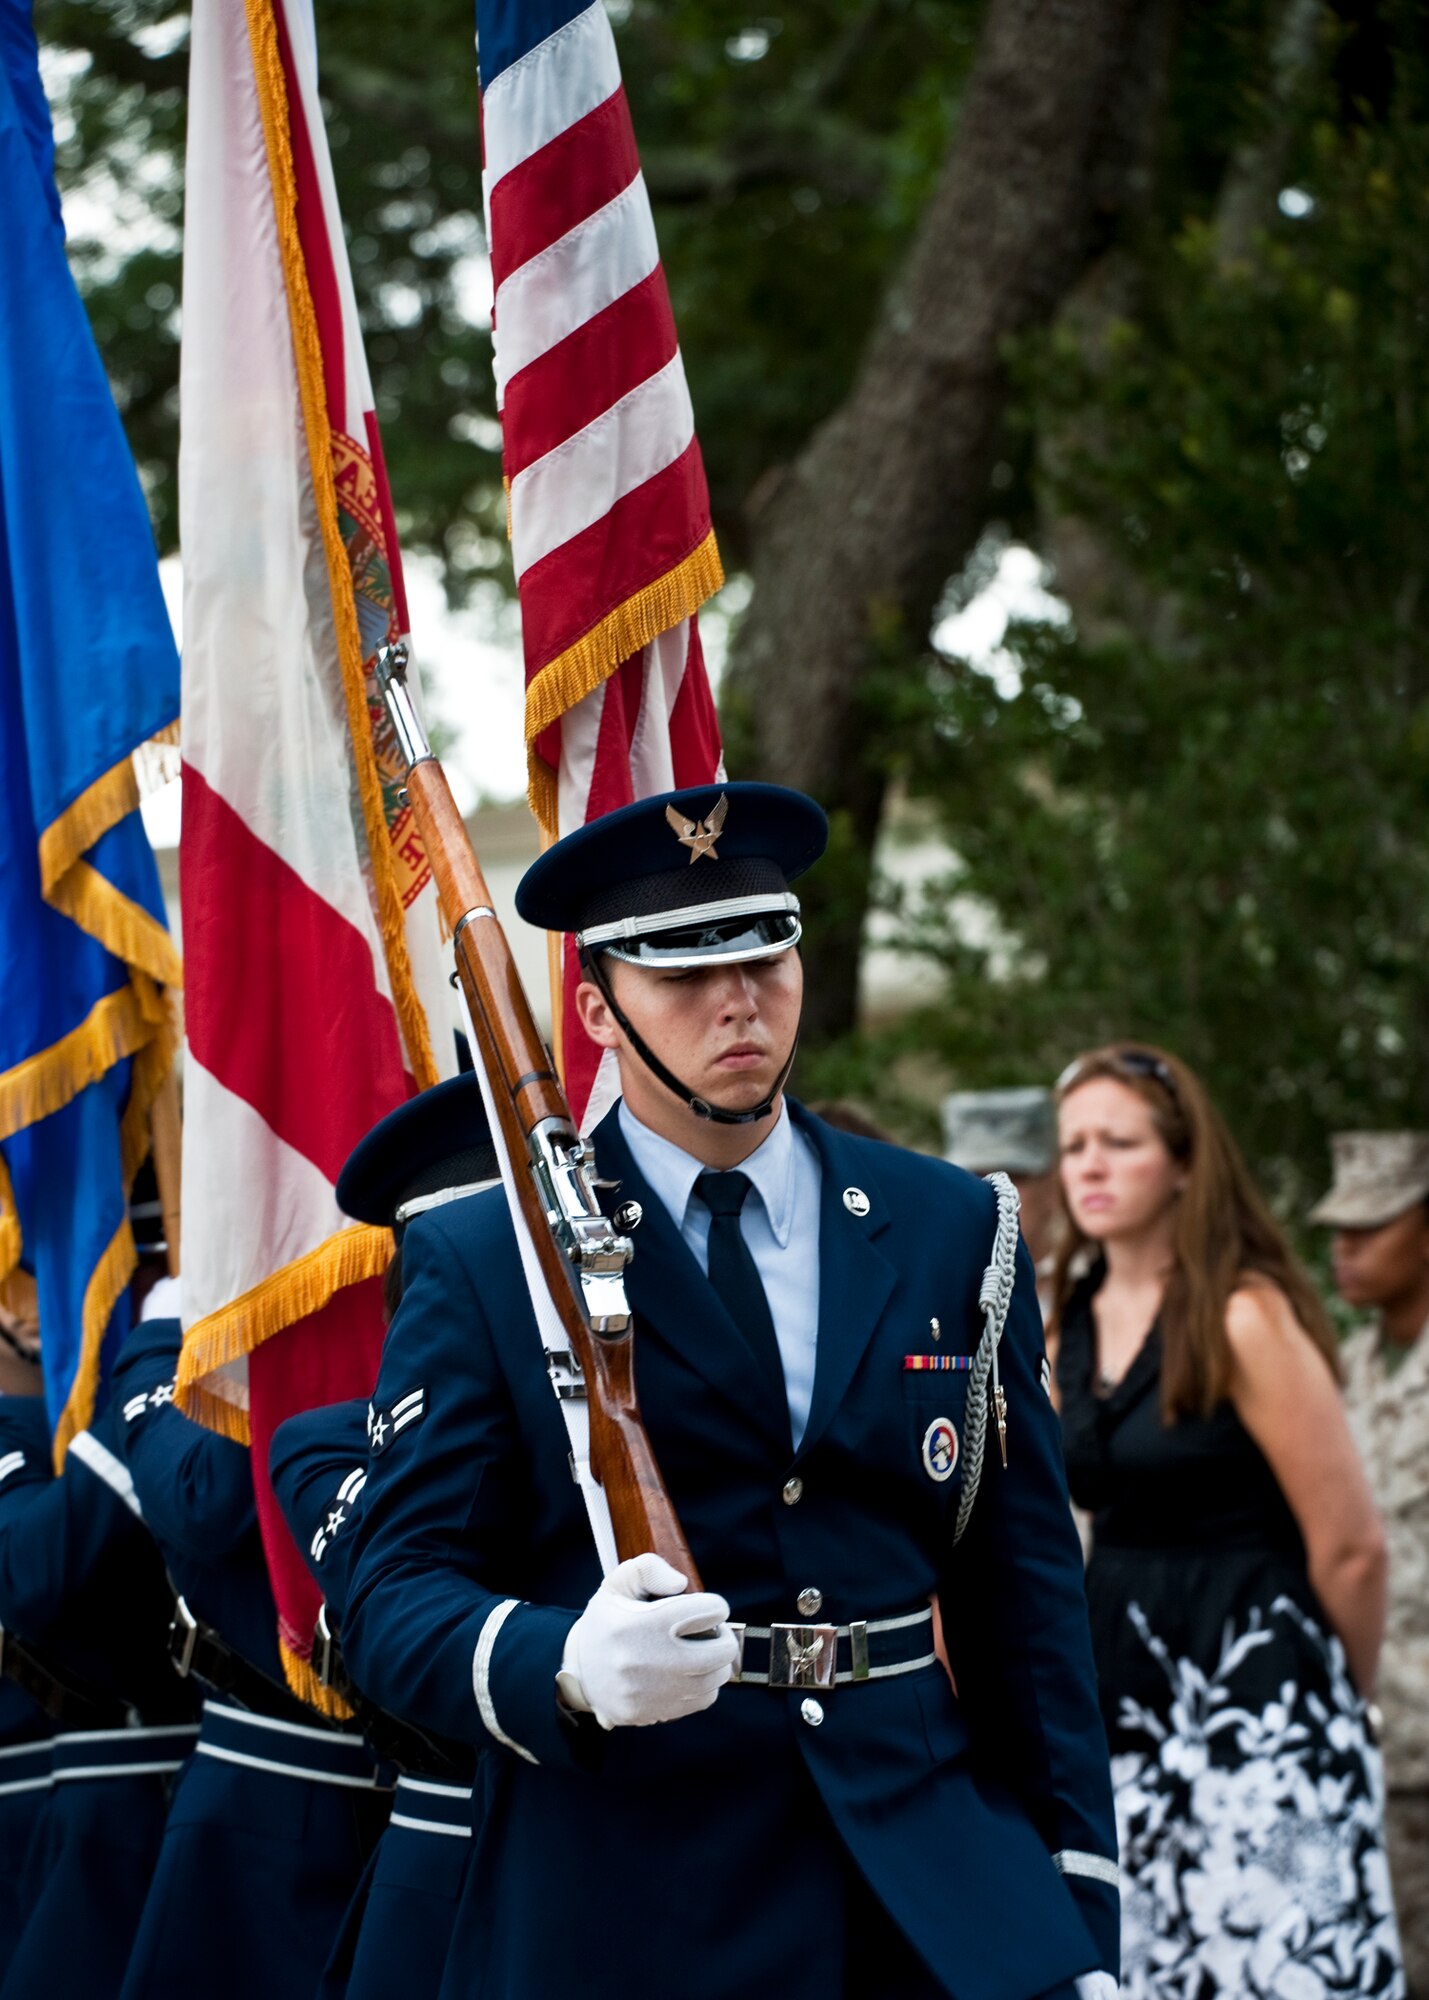 Eglin Air Force Base honor guard members bring in the colors during the Khobar Towers Memorial ceremony June 24, 2011, at Eglin Air Force Base, Fla. June 25 marks the 15th anniversary of the bombing. (U.S. Air Force photo/Samuel King Jr.)